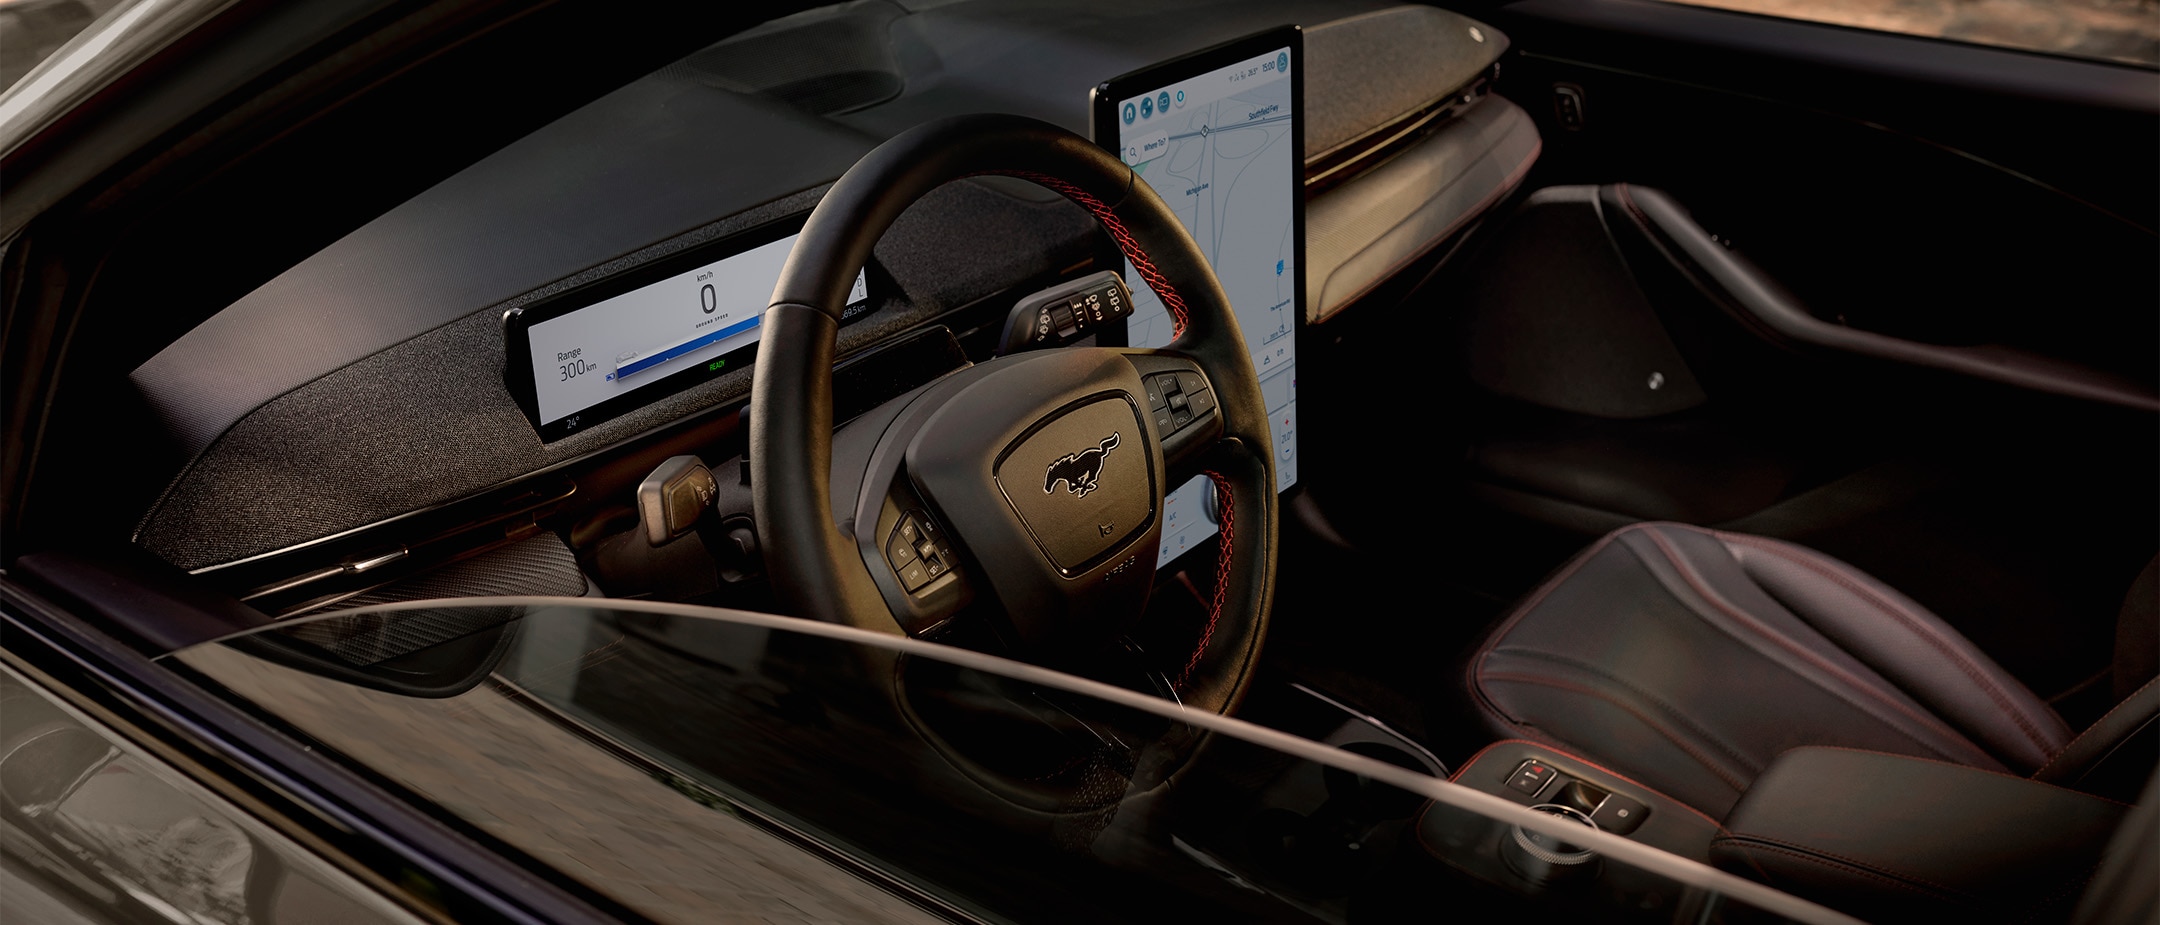 All-New Ford Mustang Mach-E interior with the steering wheel and Next Generation SYNC screen